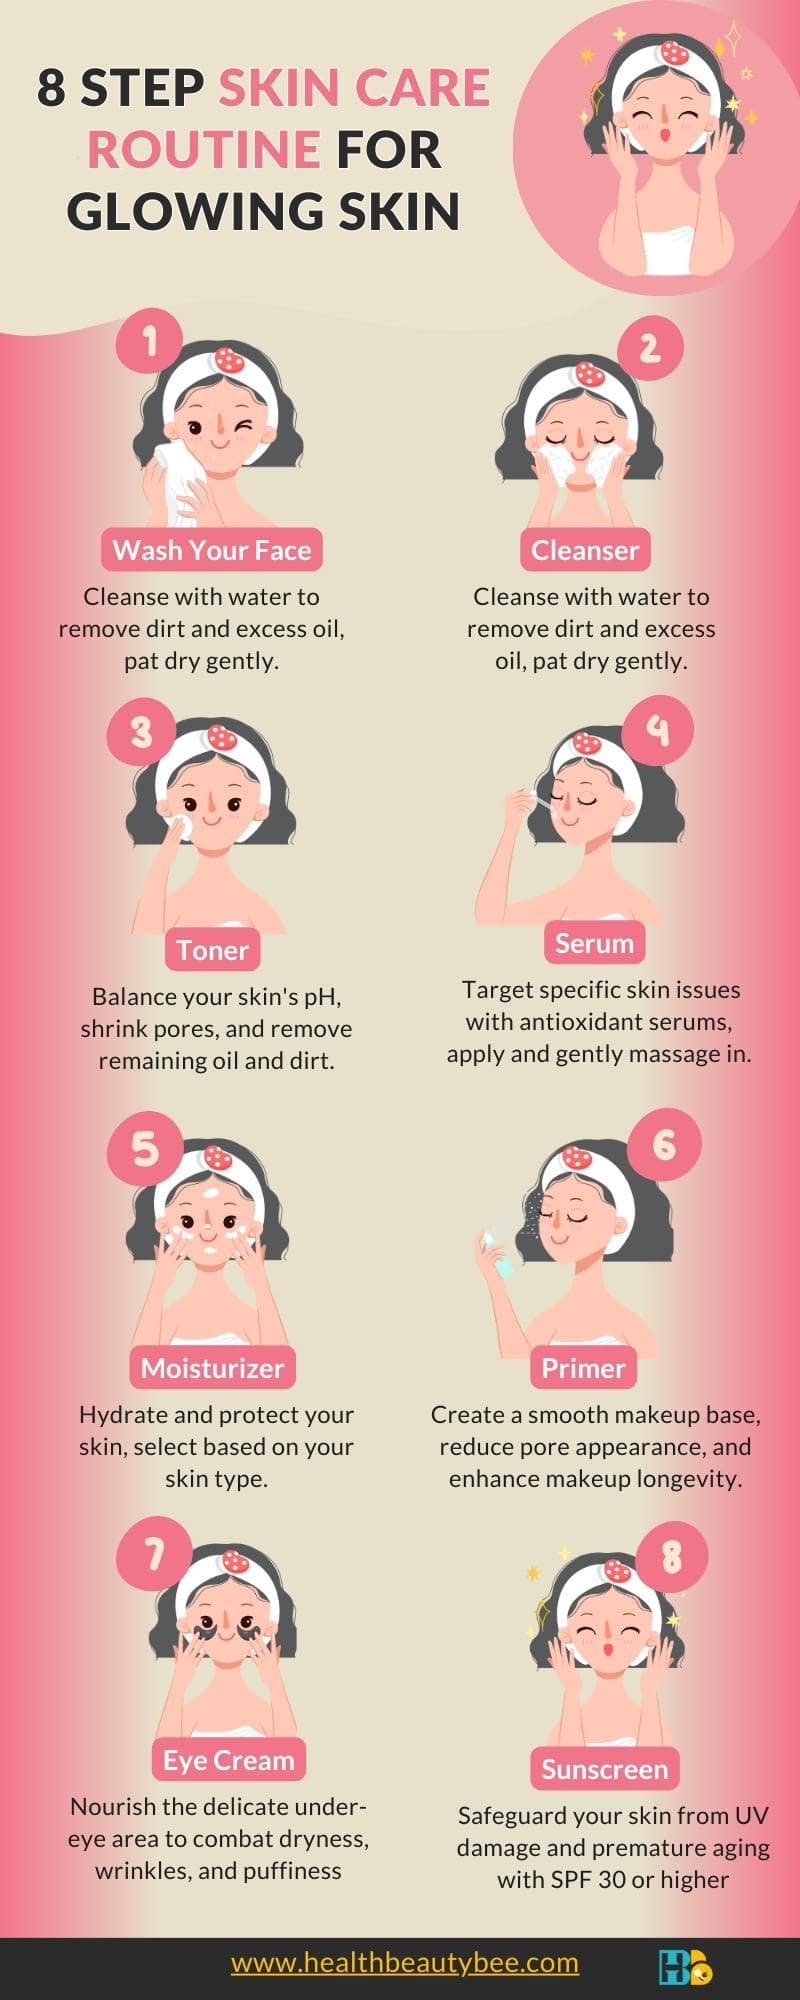 Morning Skin Care Routine For Glowing Skin infographic healthbeautybee